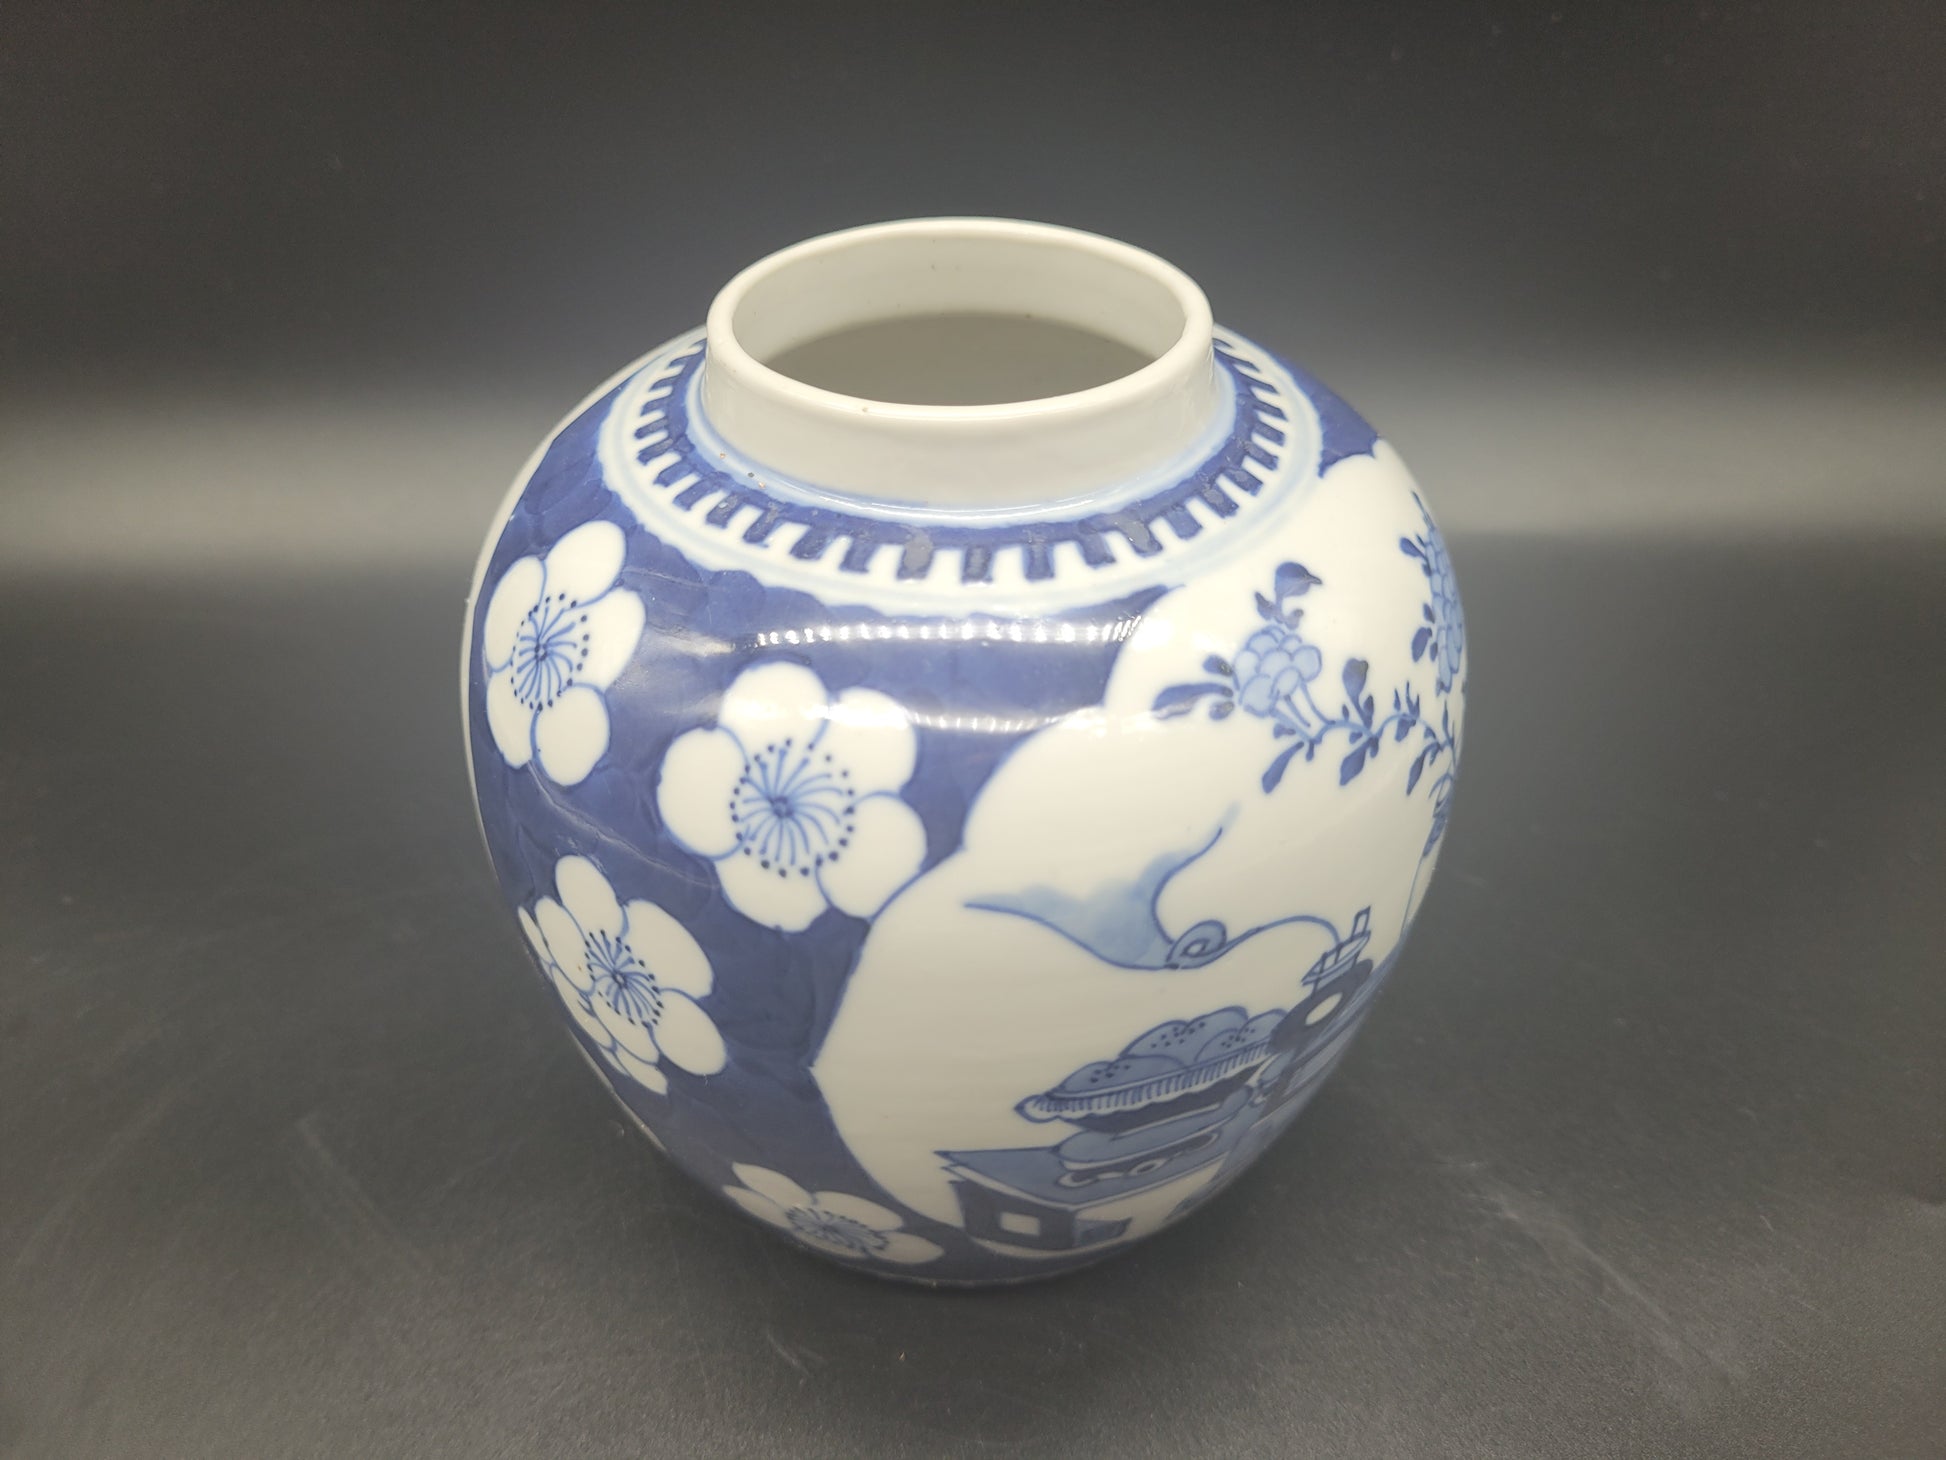 BUY ANTIQUES ONLINE Hand Painted Chinese 19th Century Ginger Jar & Lid Decorated in the Prunus Precious Objects Pattern 4 Character Mark 